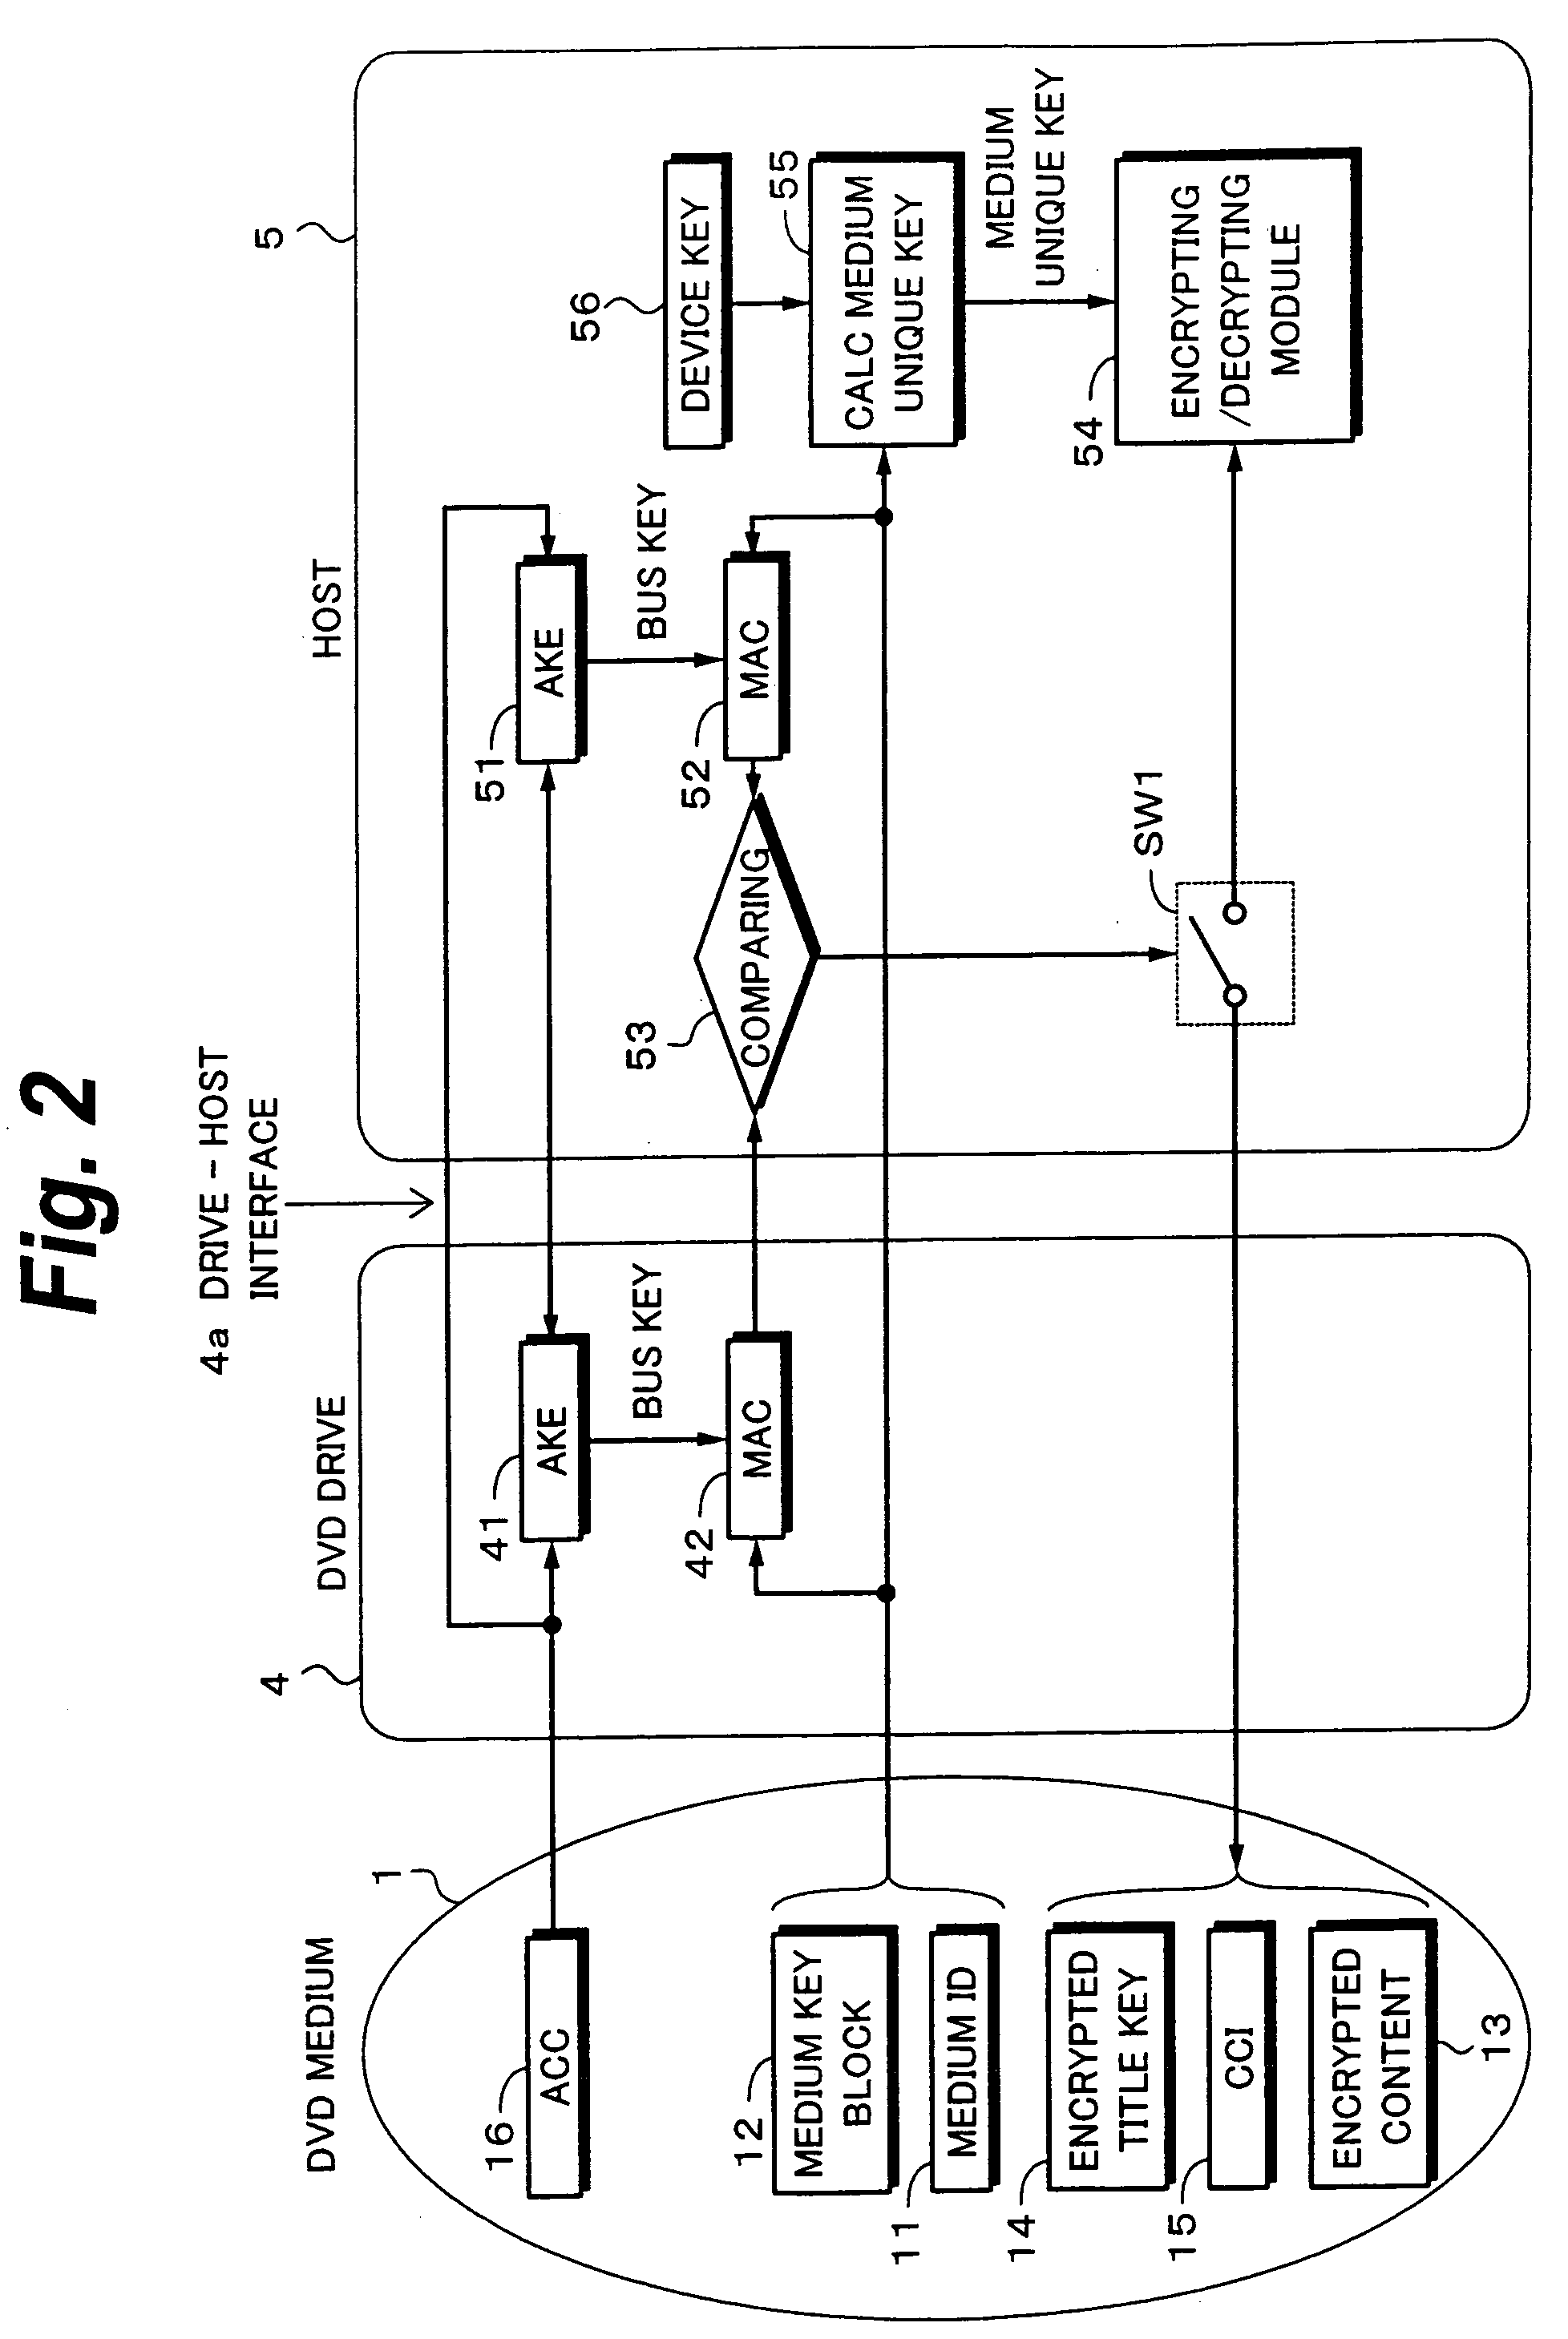 Recording/reproduction device, data processing device, and recording/reproduction system